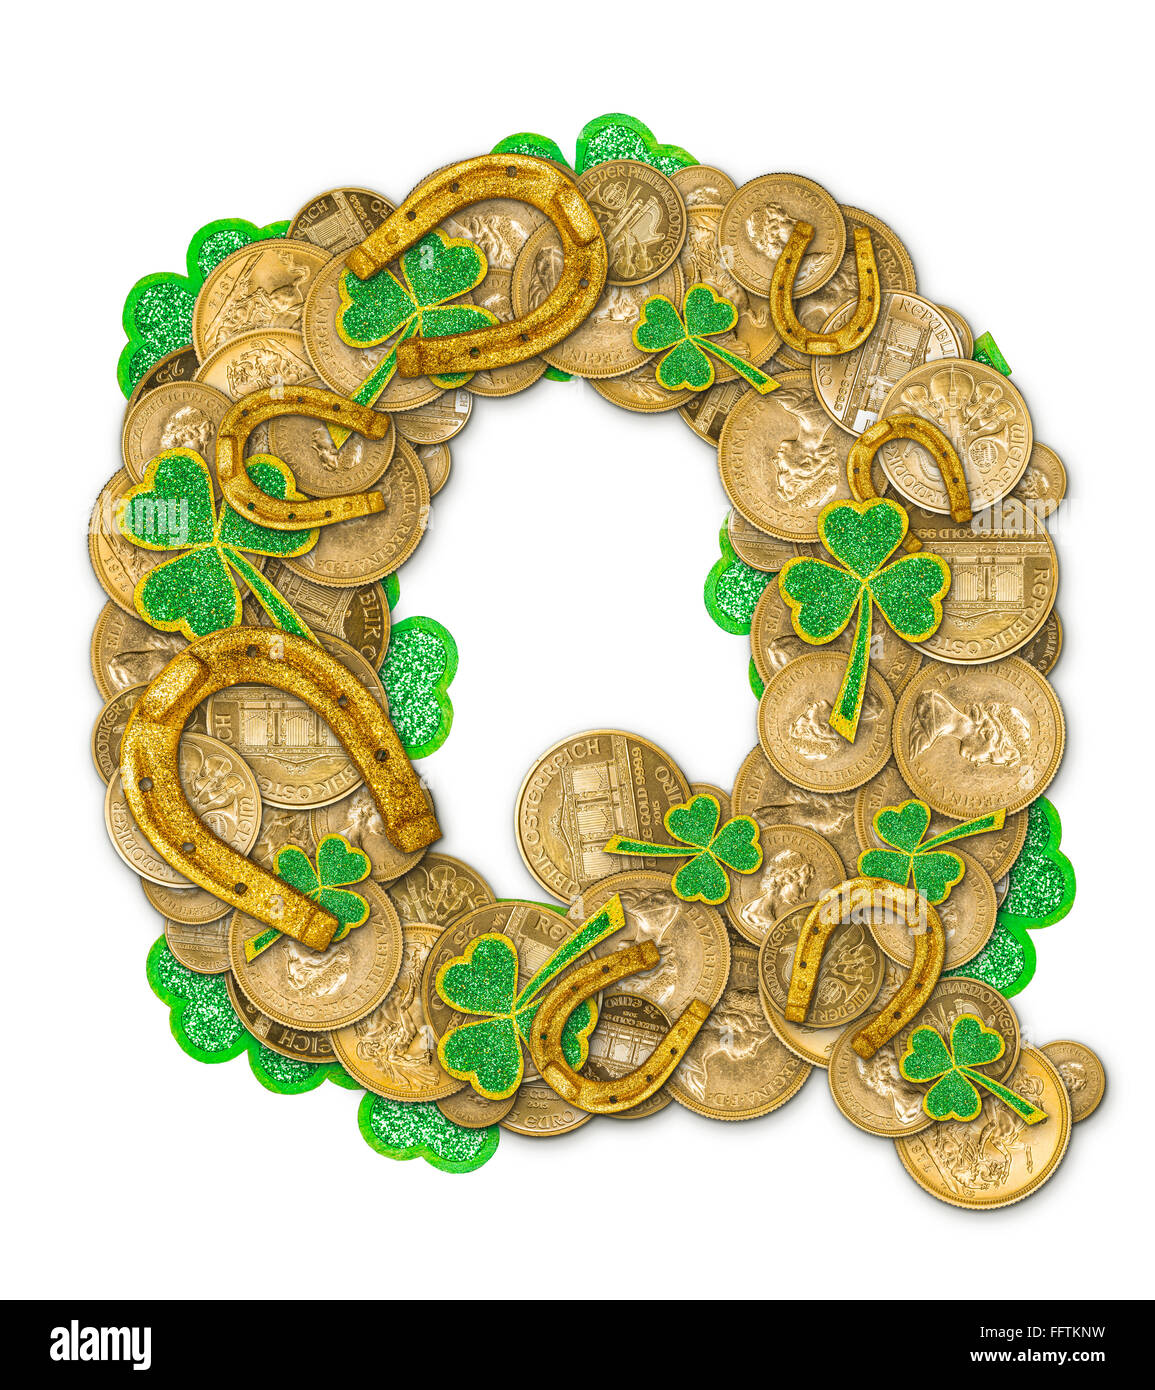 St. Patricks Day holiday letter Q made of coins, shamrocks and  horseshoes Stock Photo